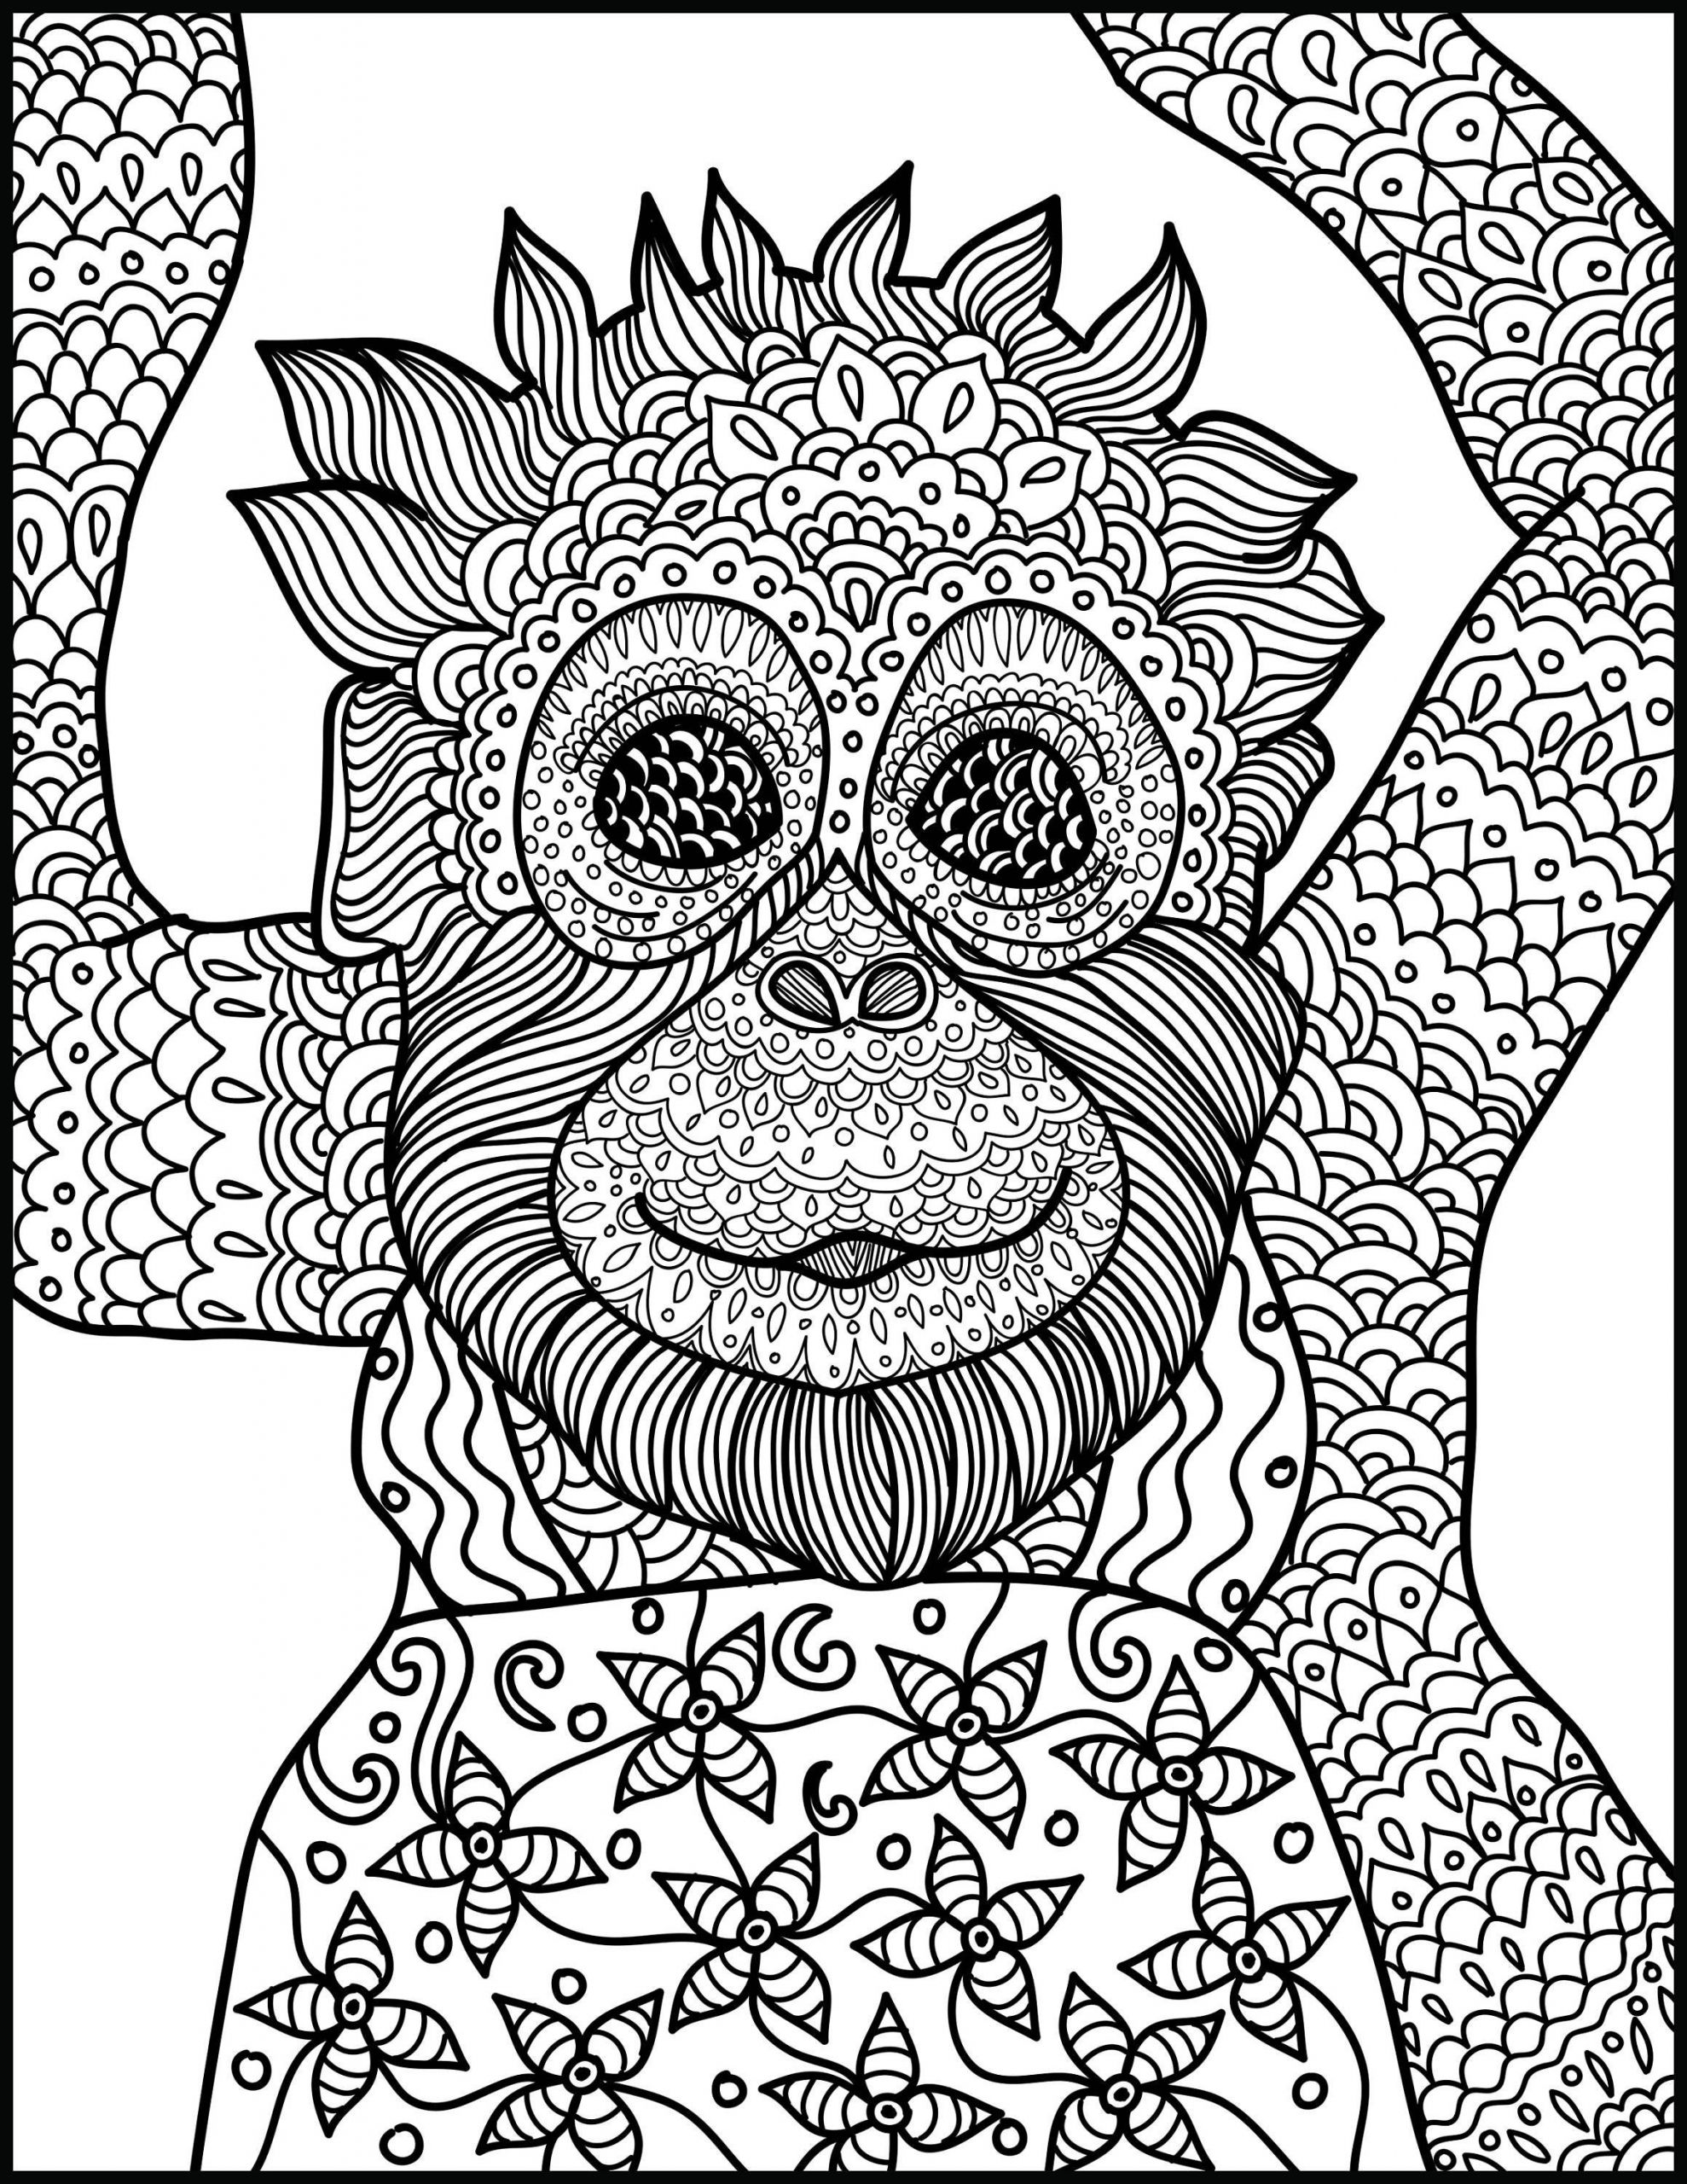 Coloring Pages For Adults Animals
 Animal Coloring Page Monkey Printable Adult Coloring Page